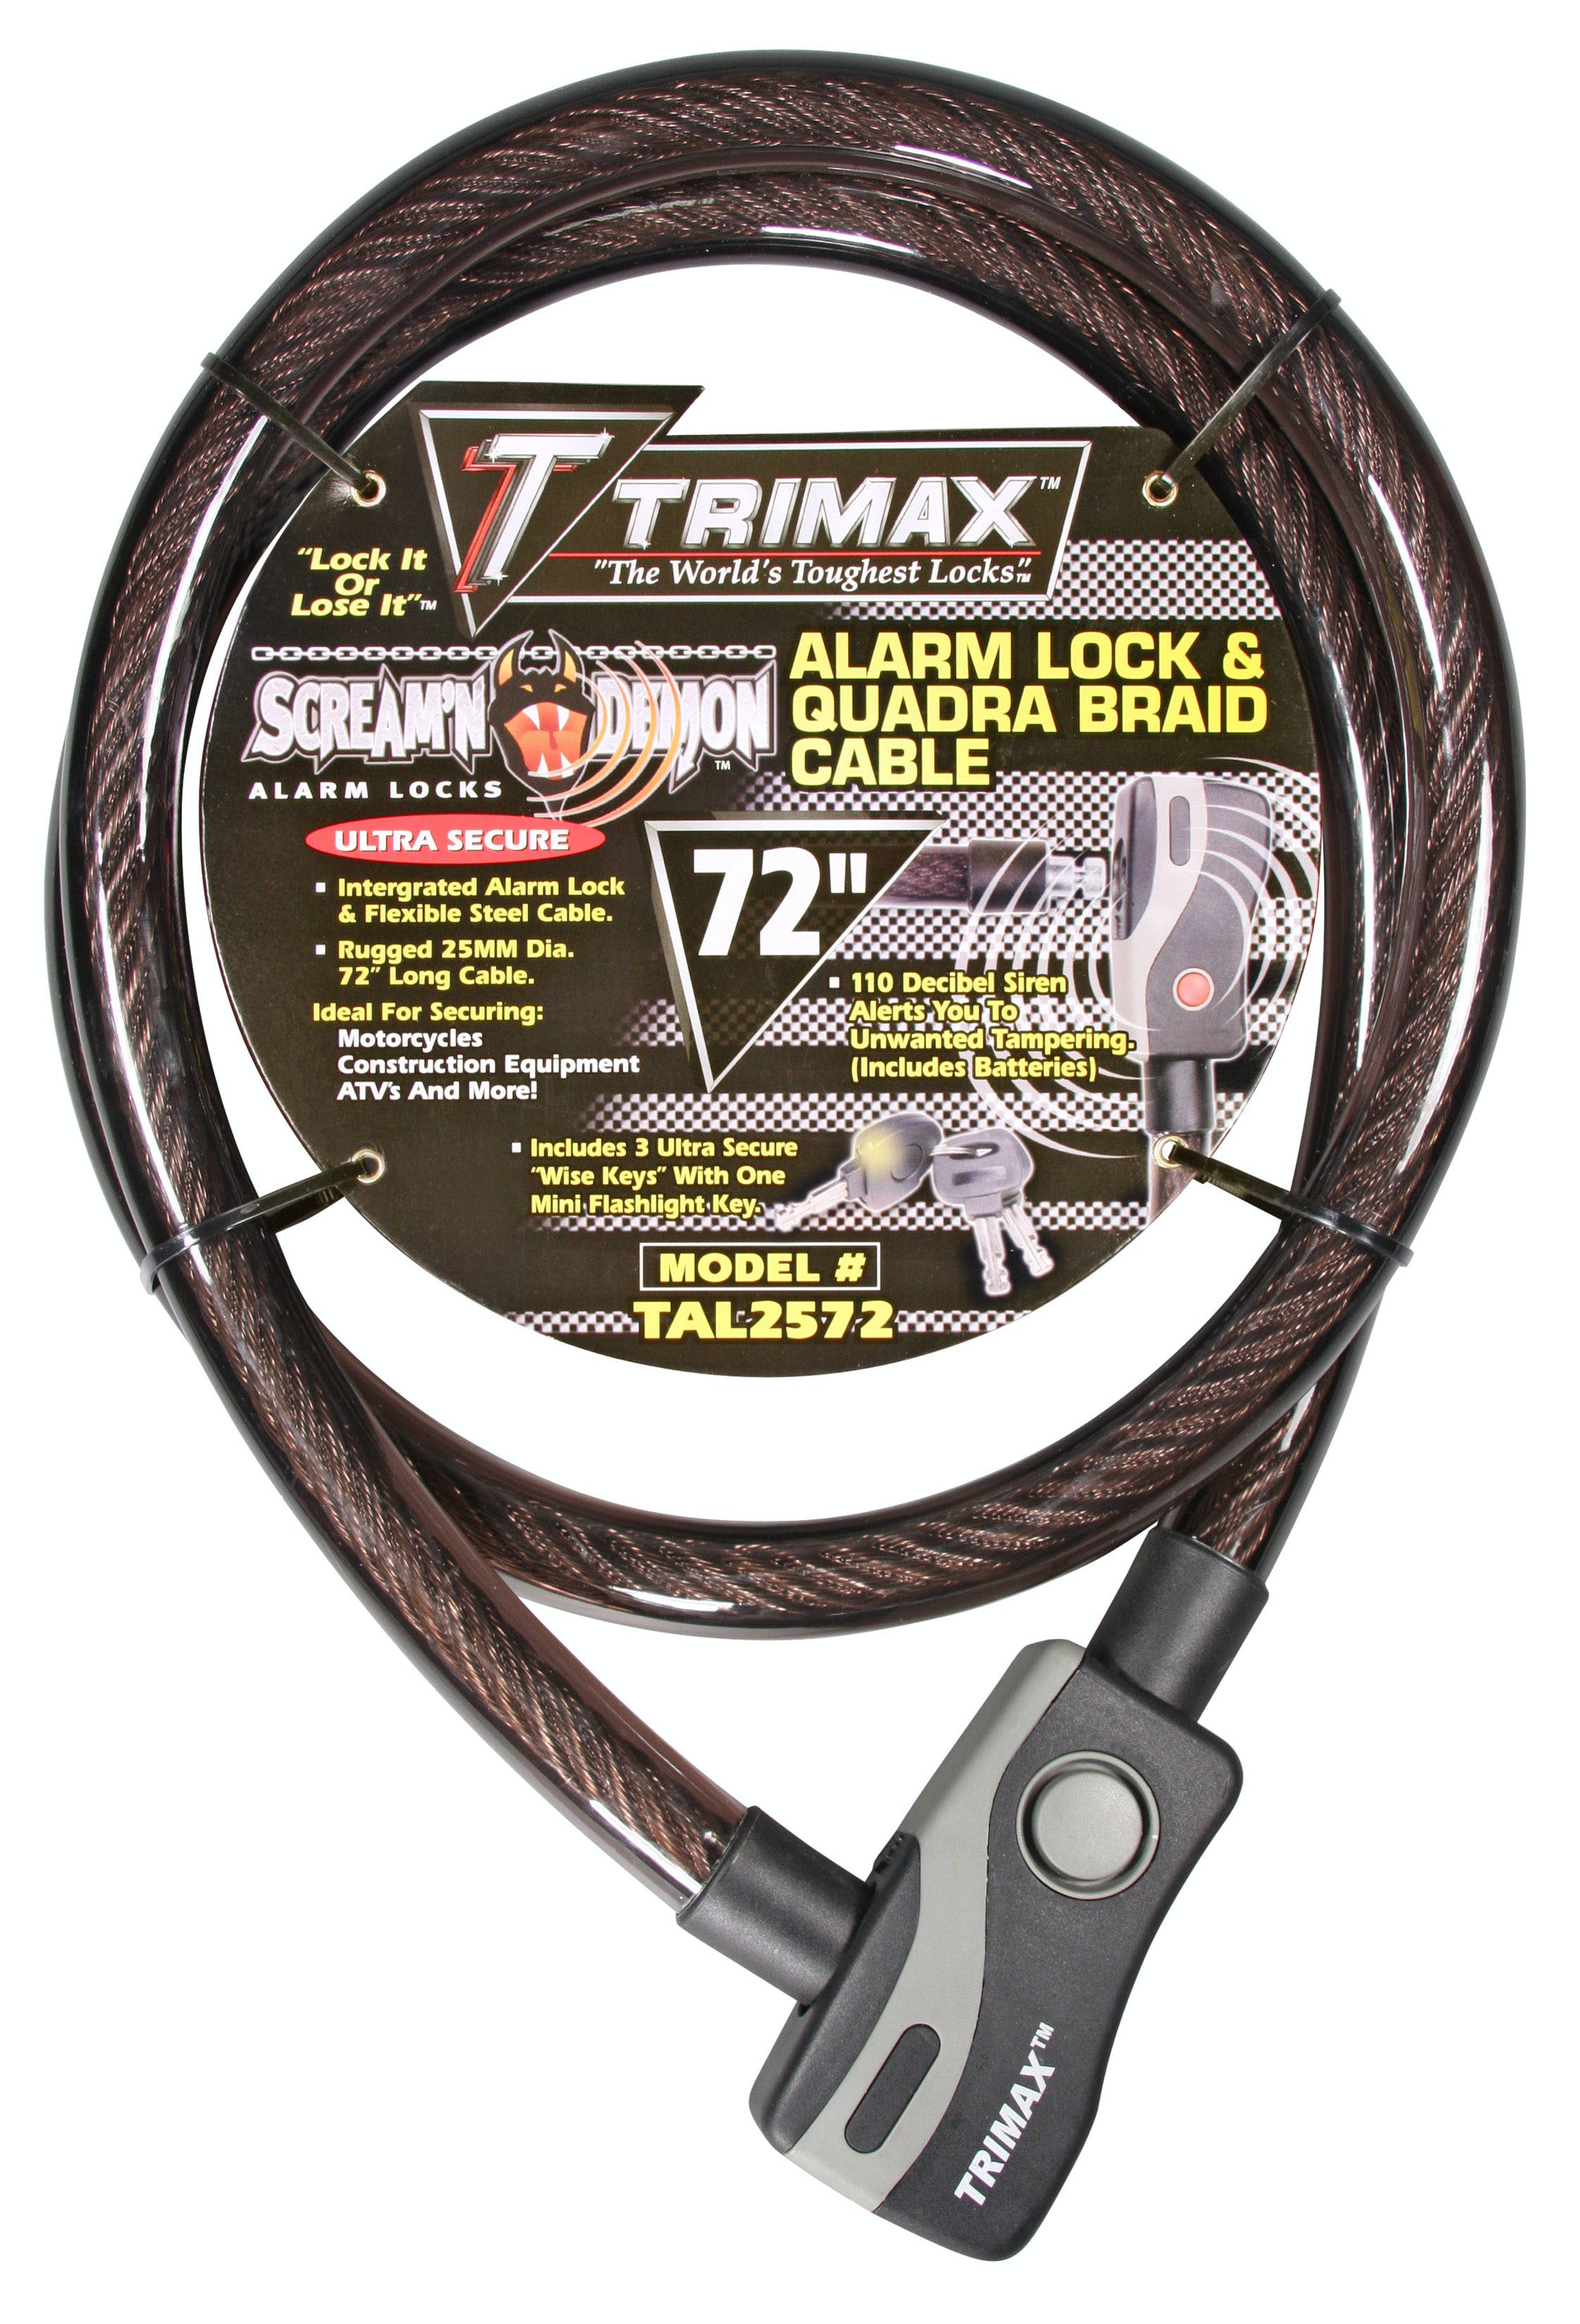 TRIMAX TAL2572 Alarm Lock and Quadra-Braid Cable 25mm Cable X 72 inch Length